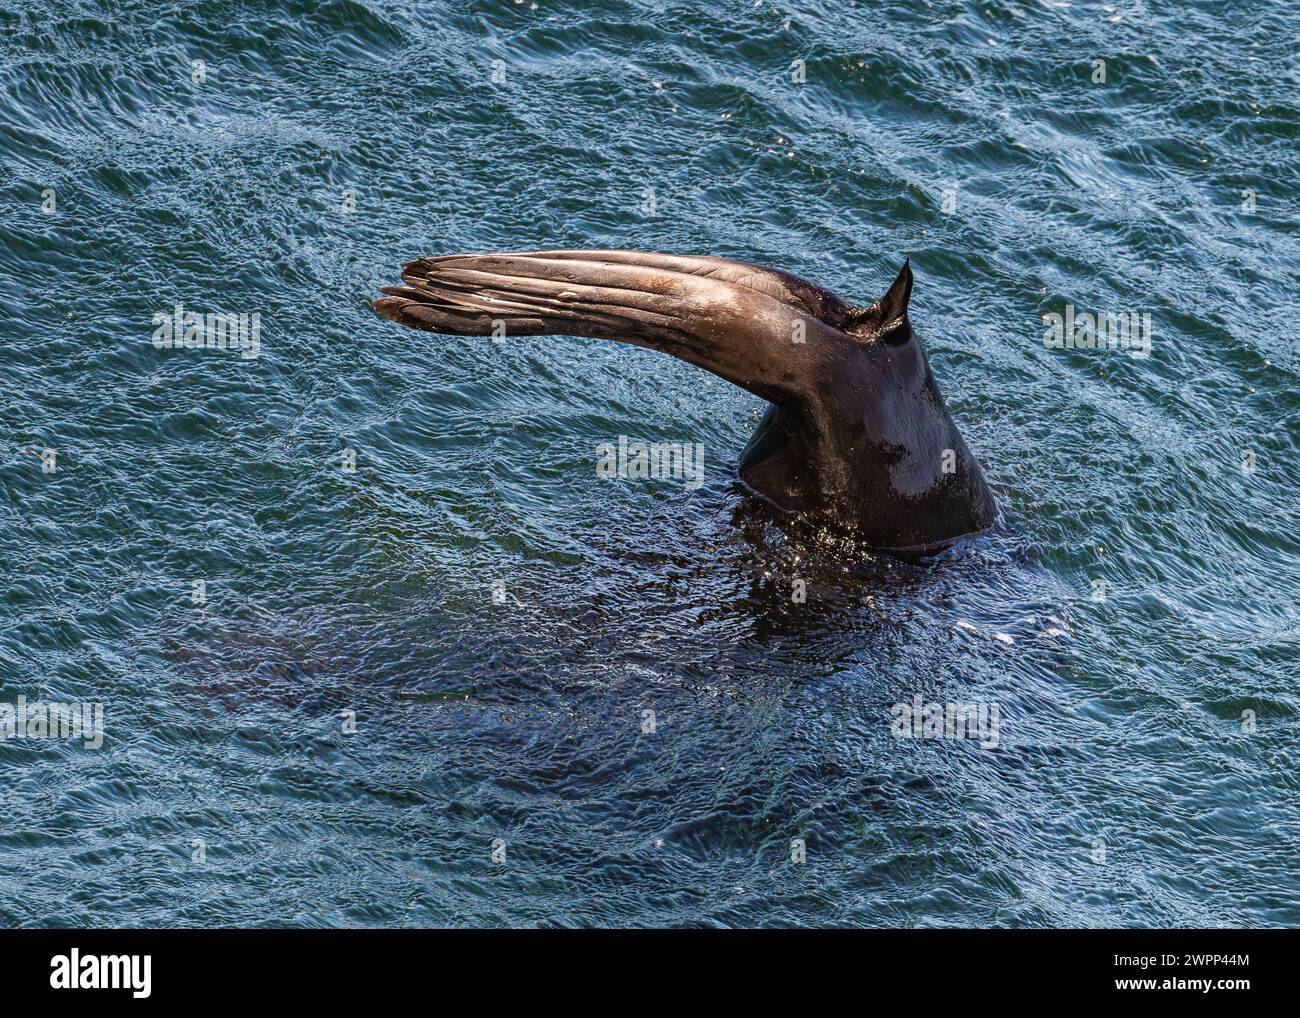 Details of hind legs of a South American Fur Seal (Arctocephalus australis). Pacific Ocean, off the coast of Chile. Stock Photo